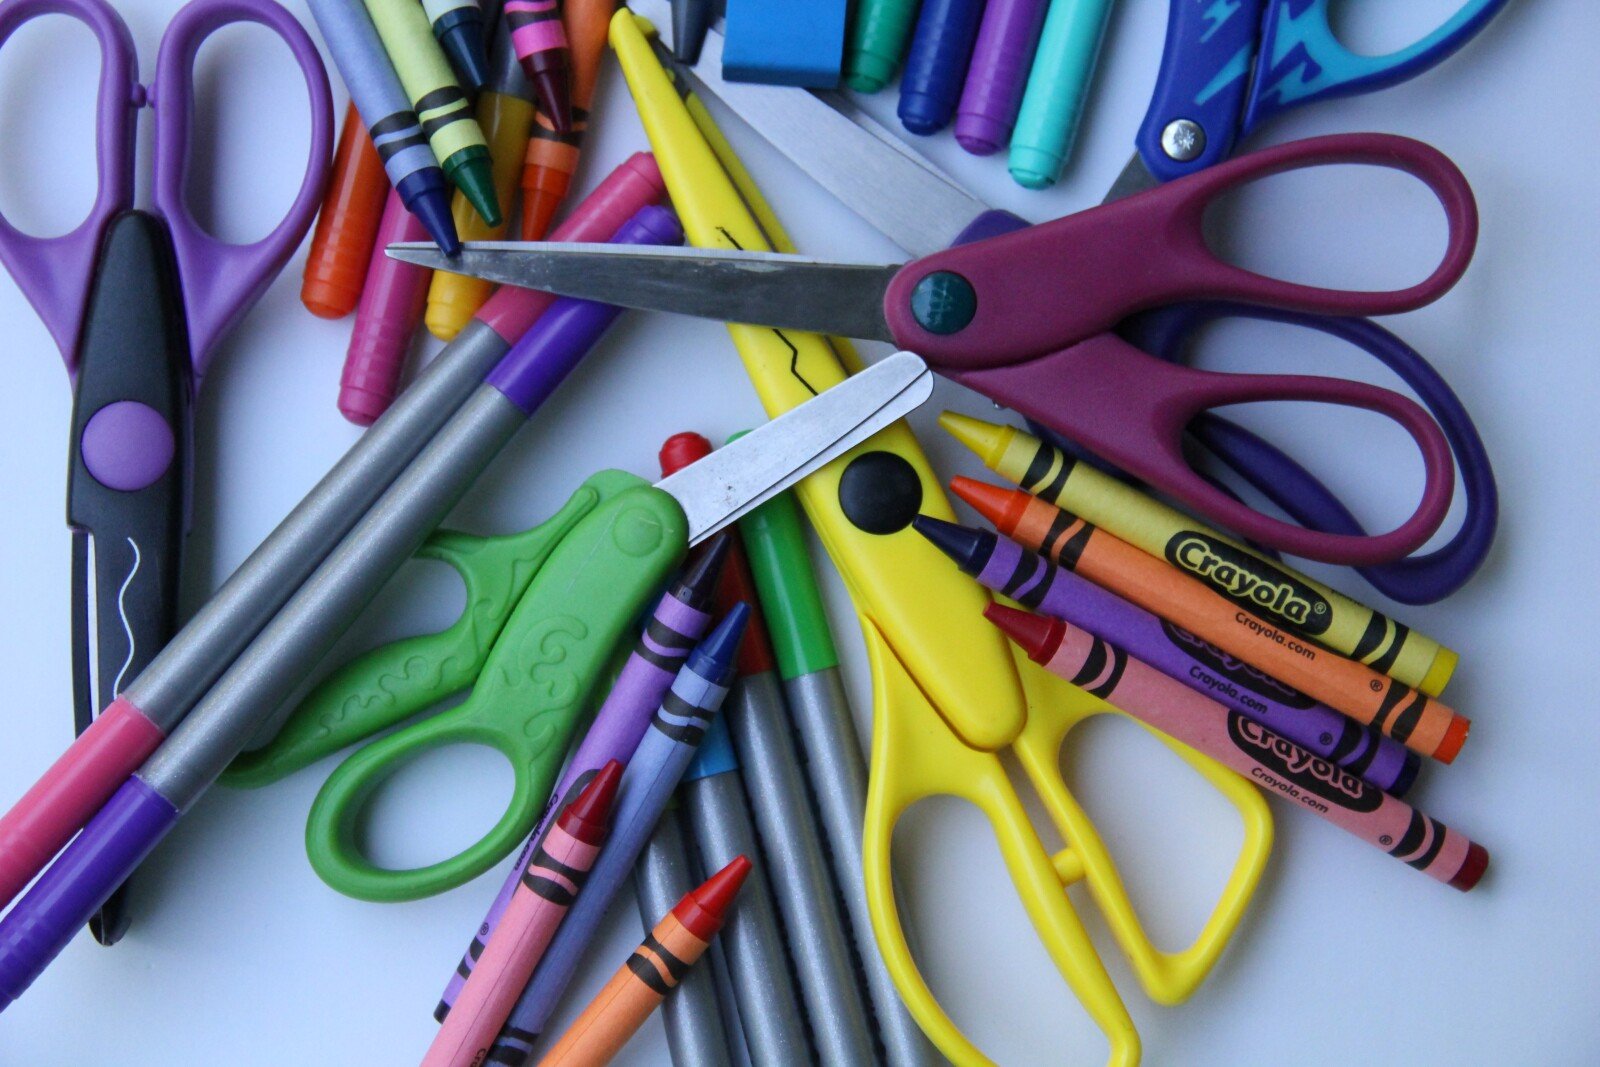 Image of preschool supplies, including scissors and crayons